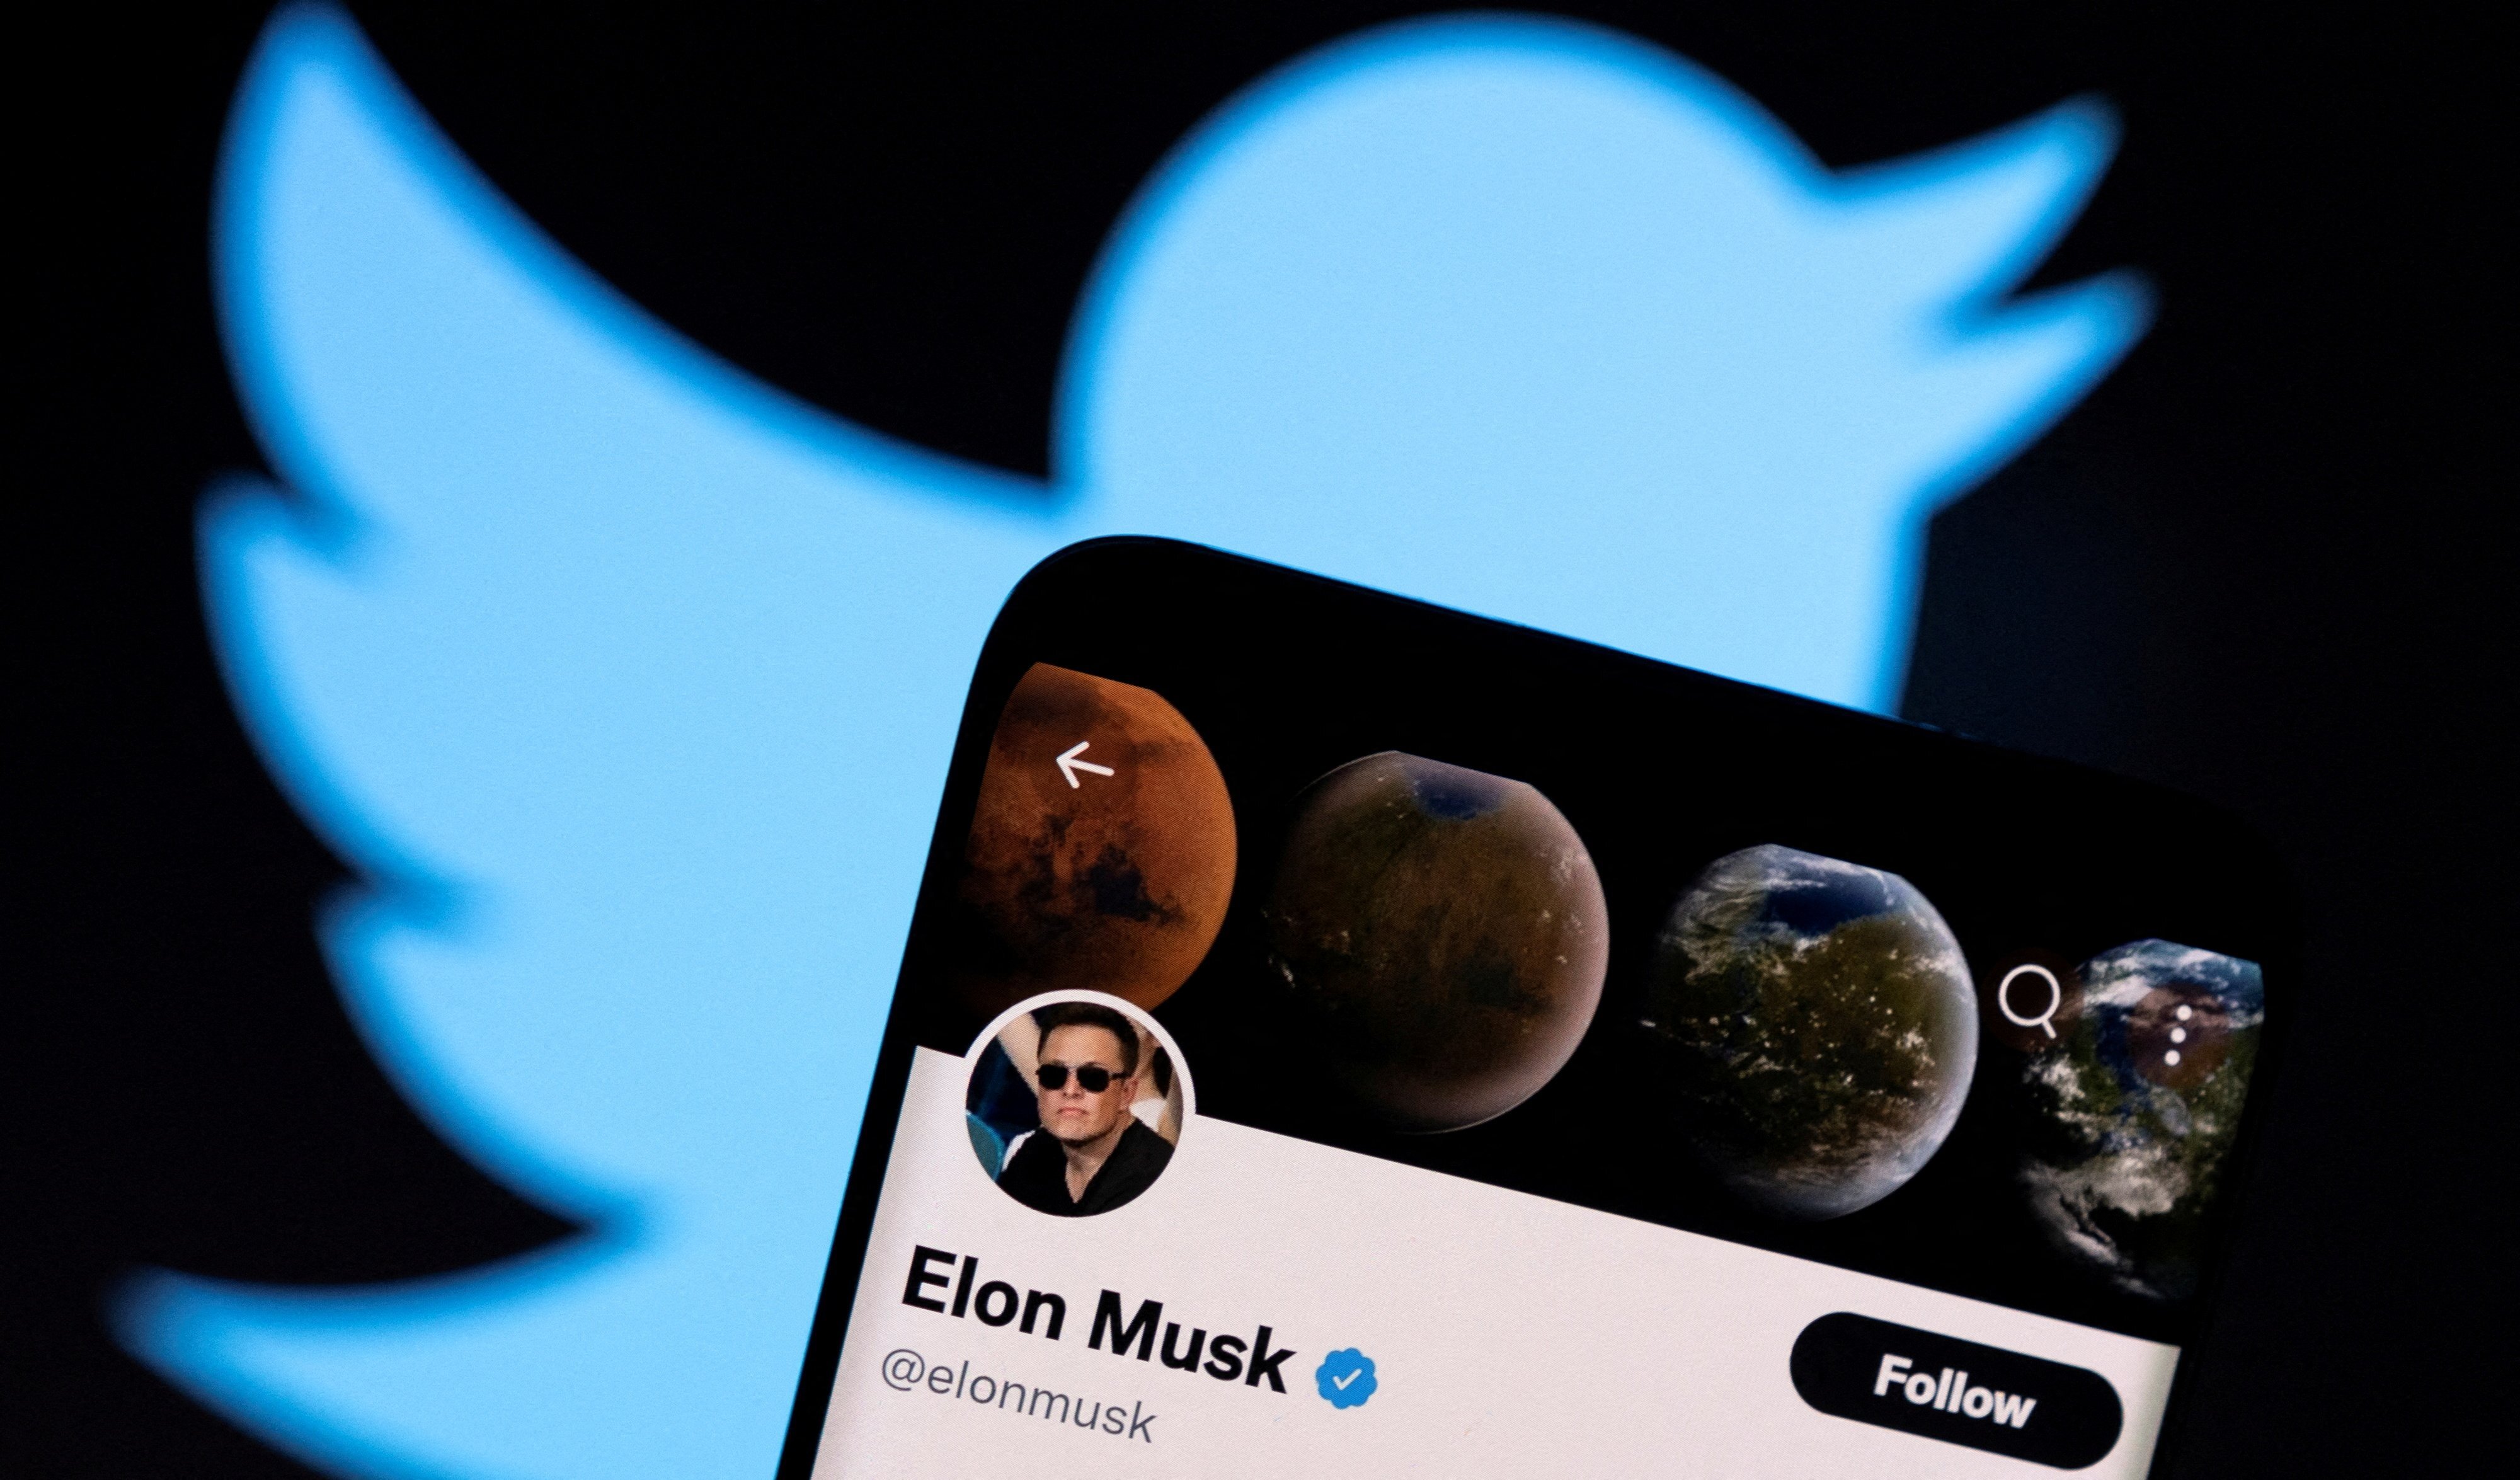 Elon Musk’s Twitter account is seen on a smartphone in front of the Twitter logo in this photo illustration taken April 15, 2022. Photo: Reuters